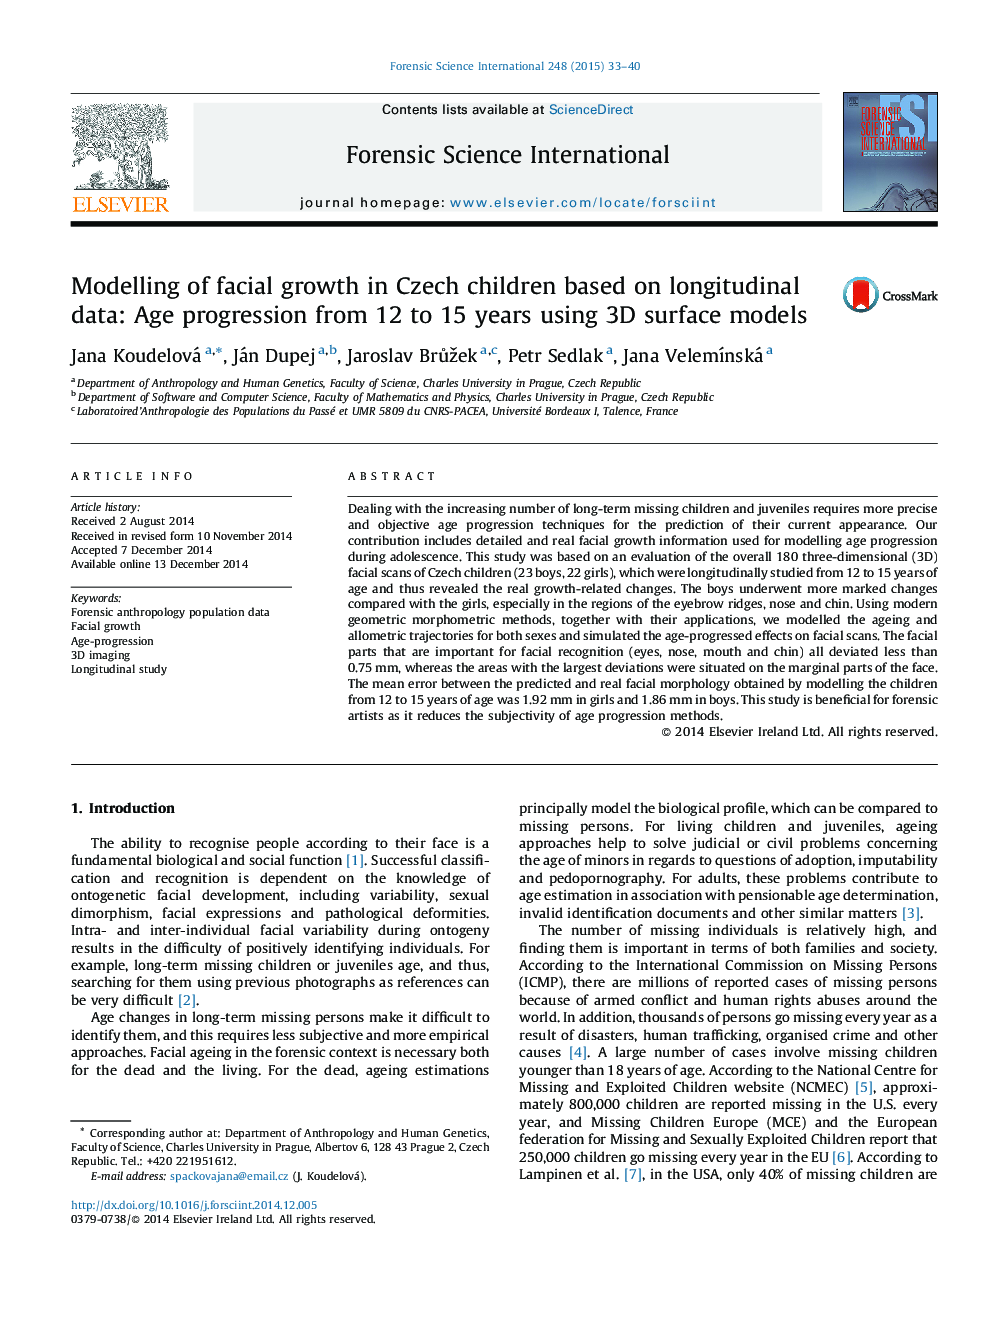 Modelling of facial growth in Czech children based on longitudinal data: Age progression from 12 to 15 years using 3D surface models